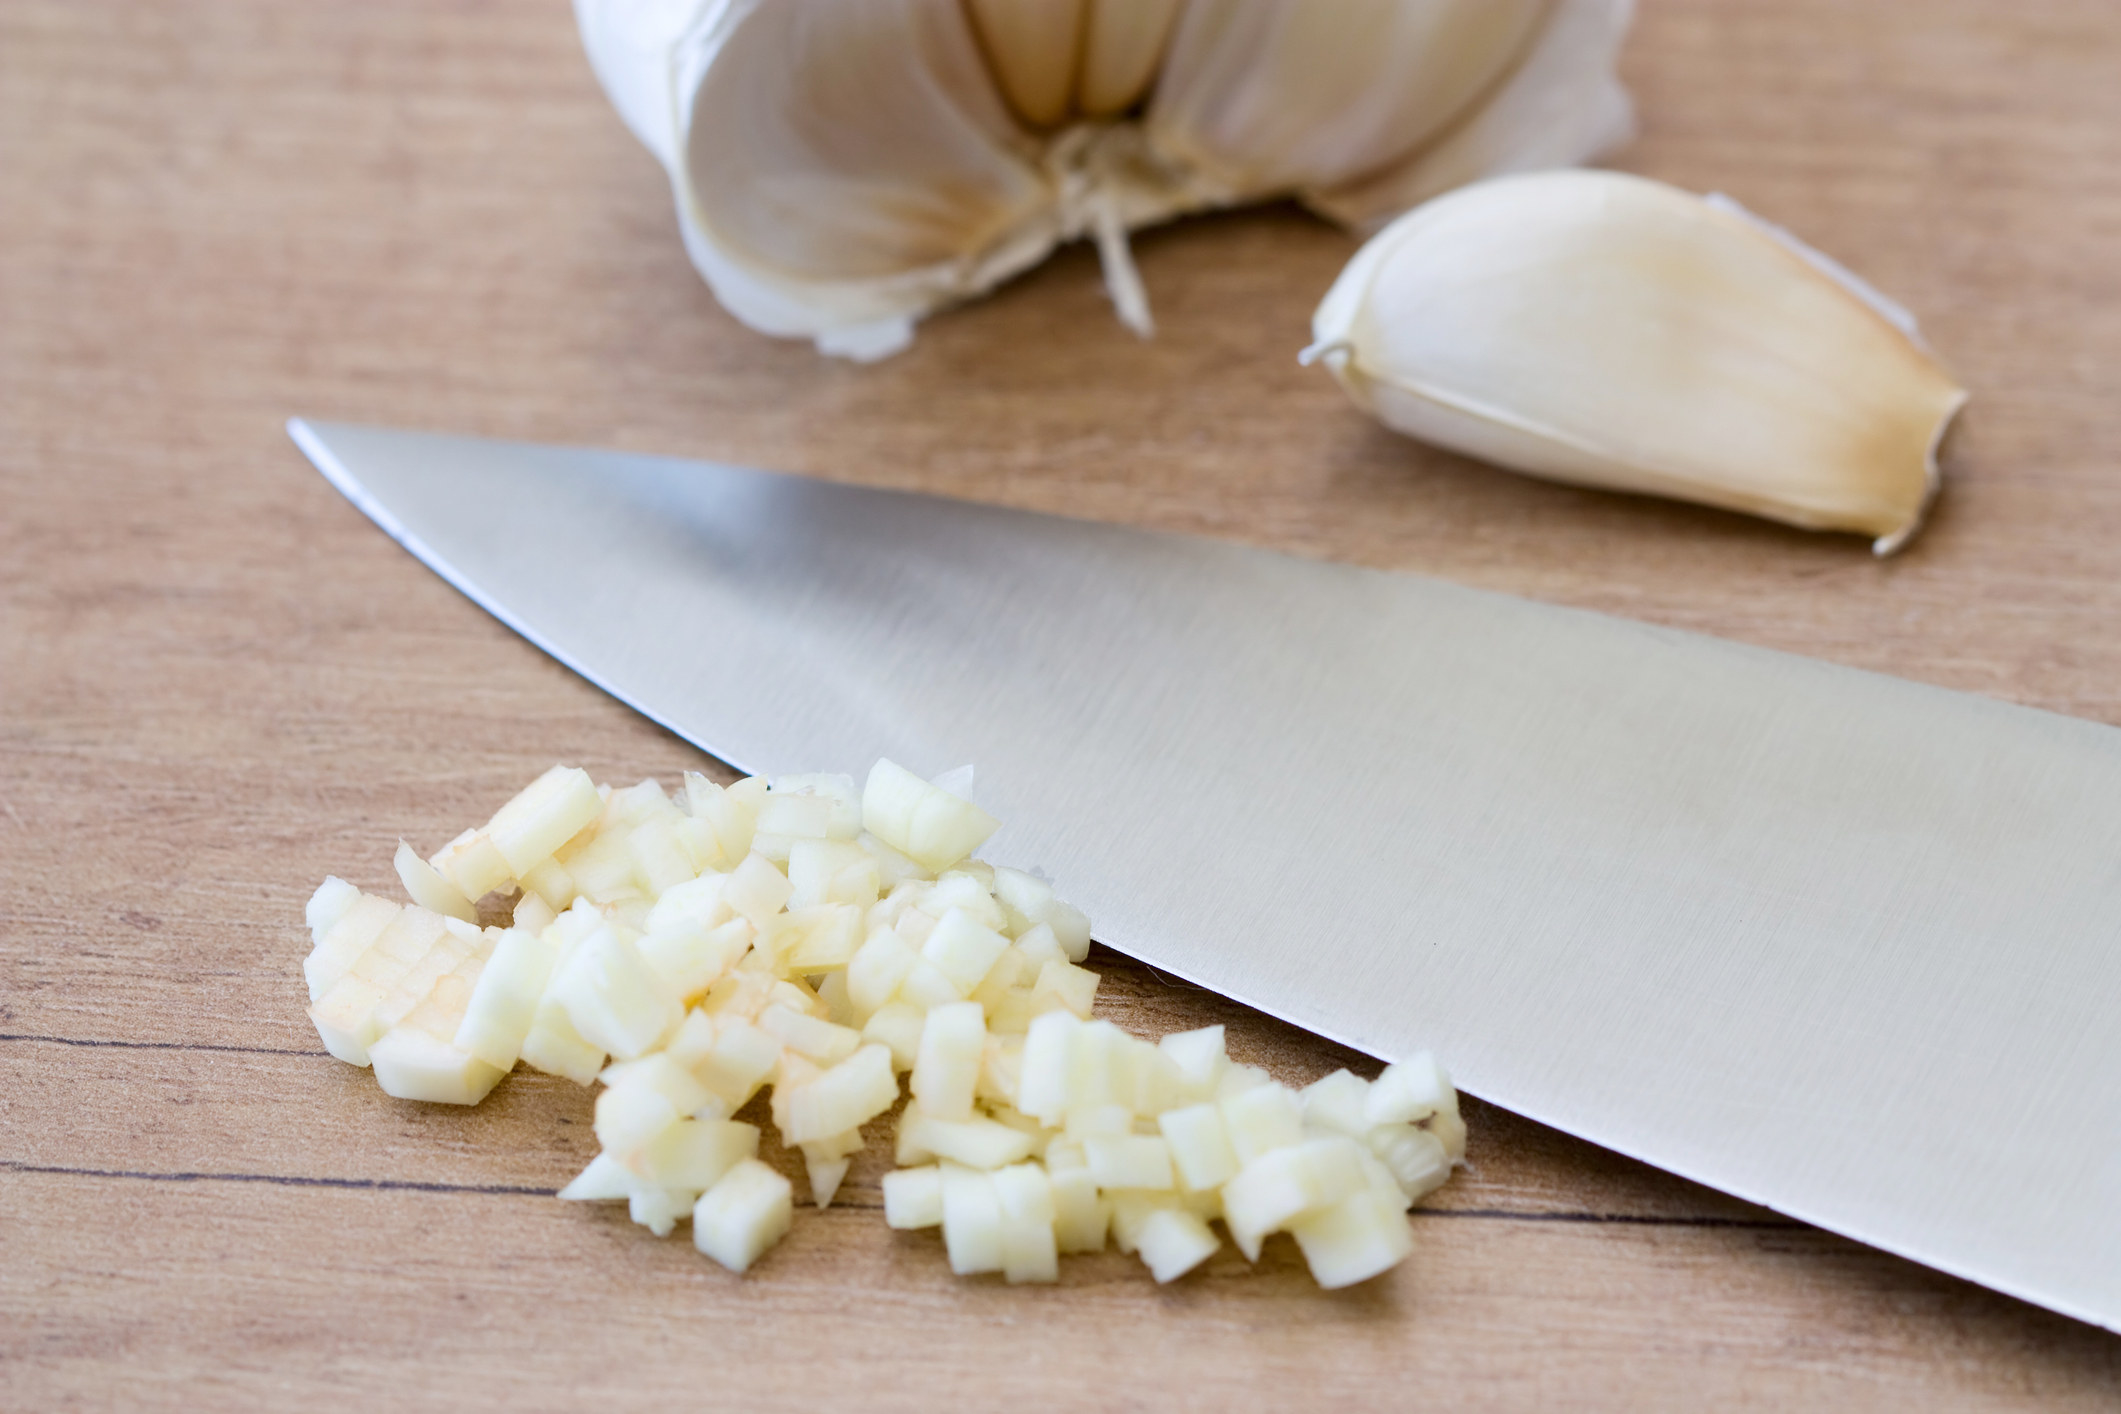 Garlic minced with a knife